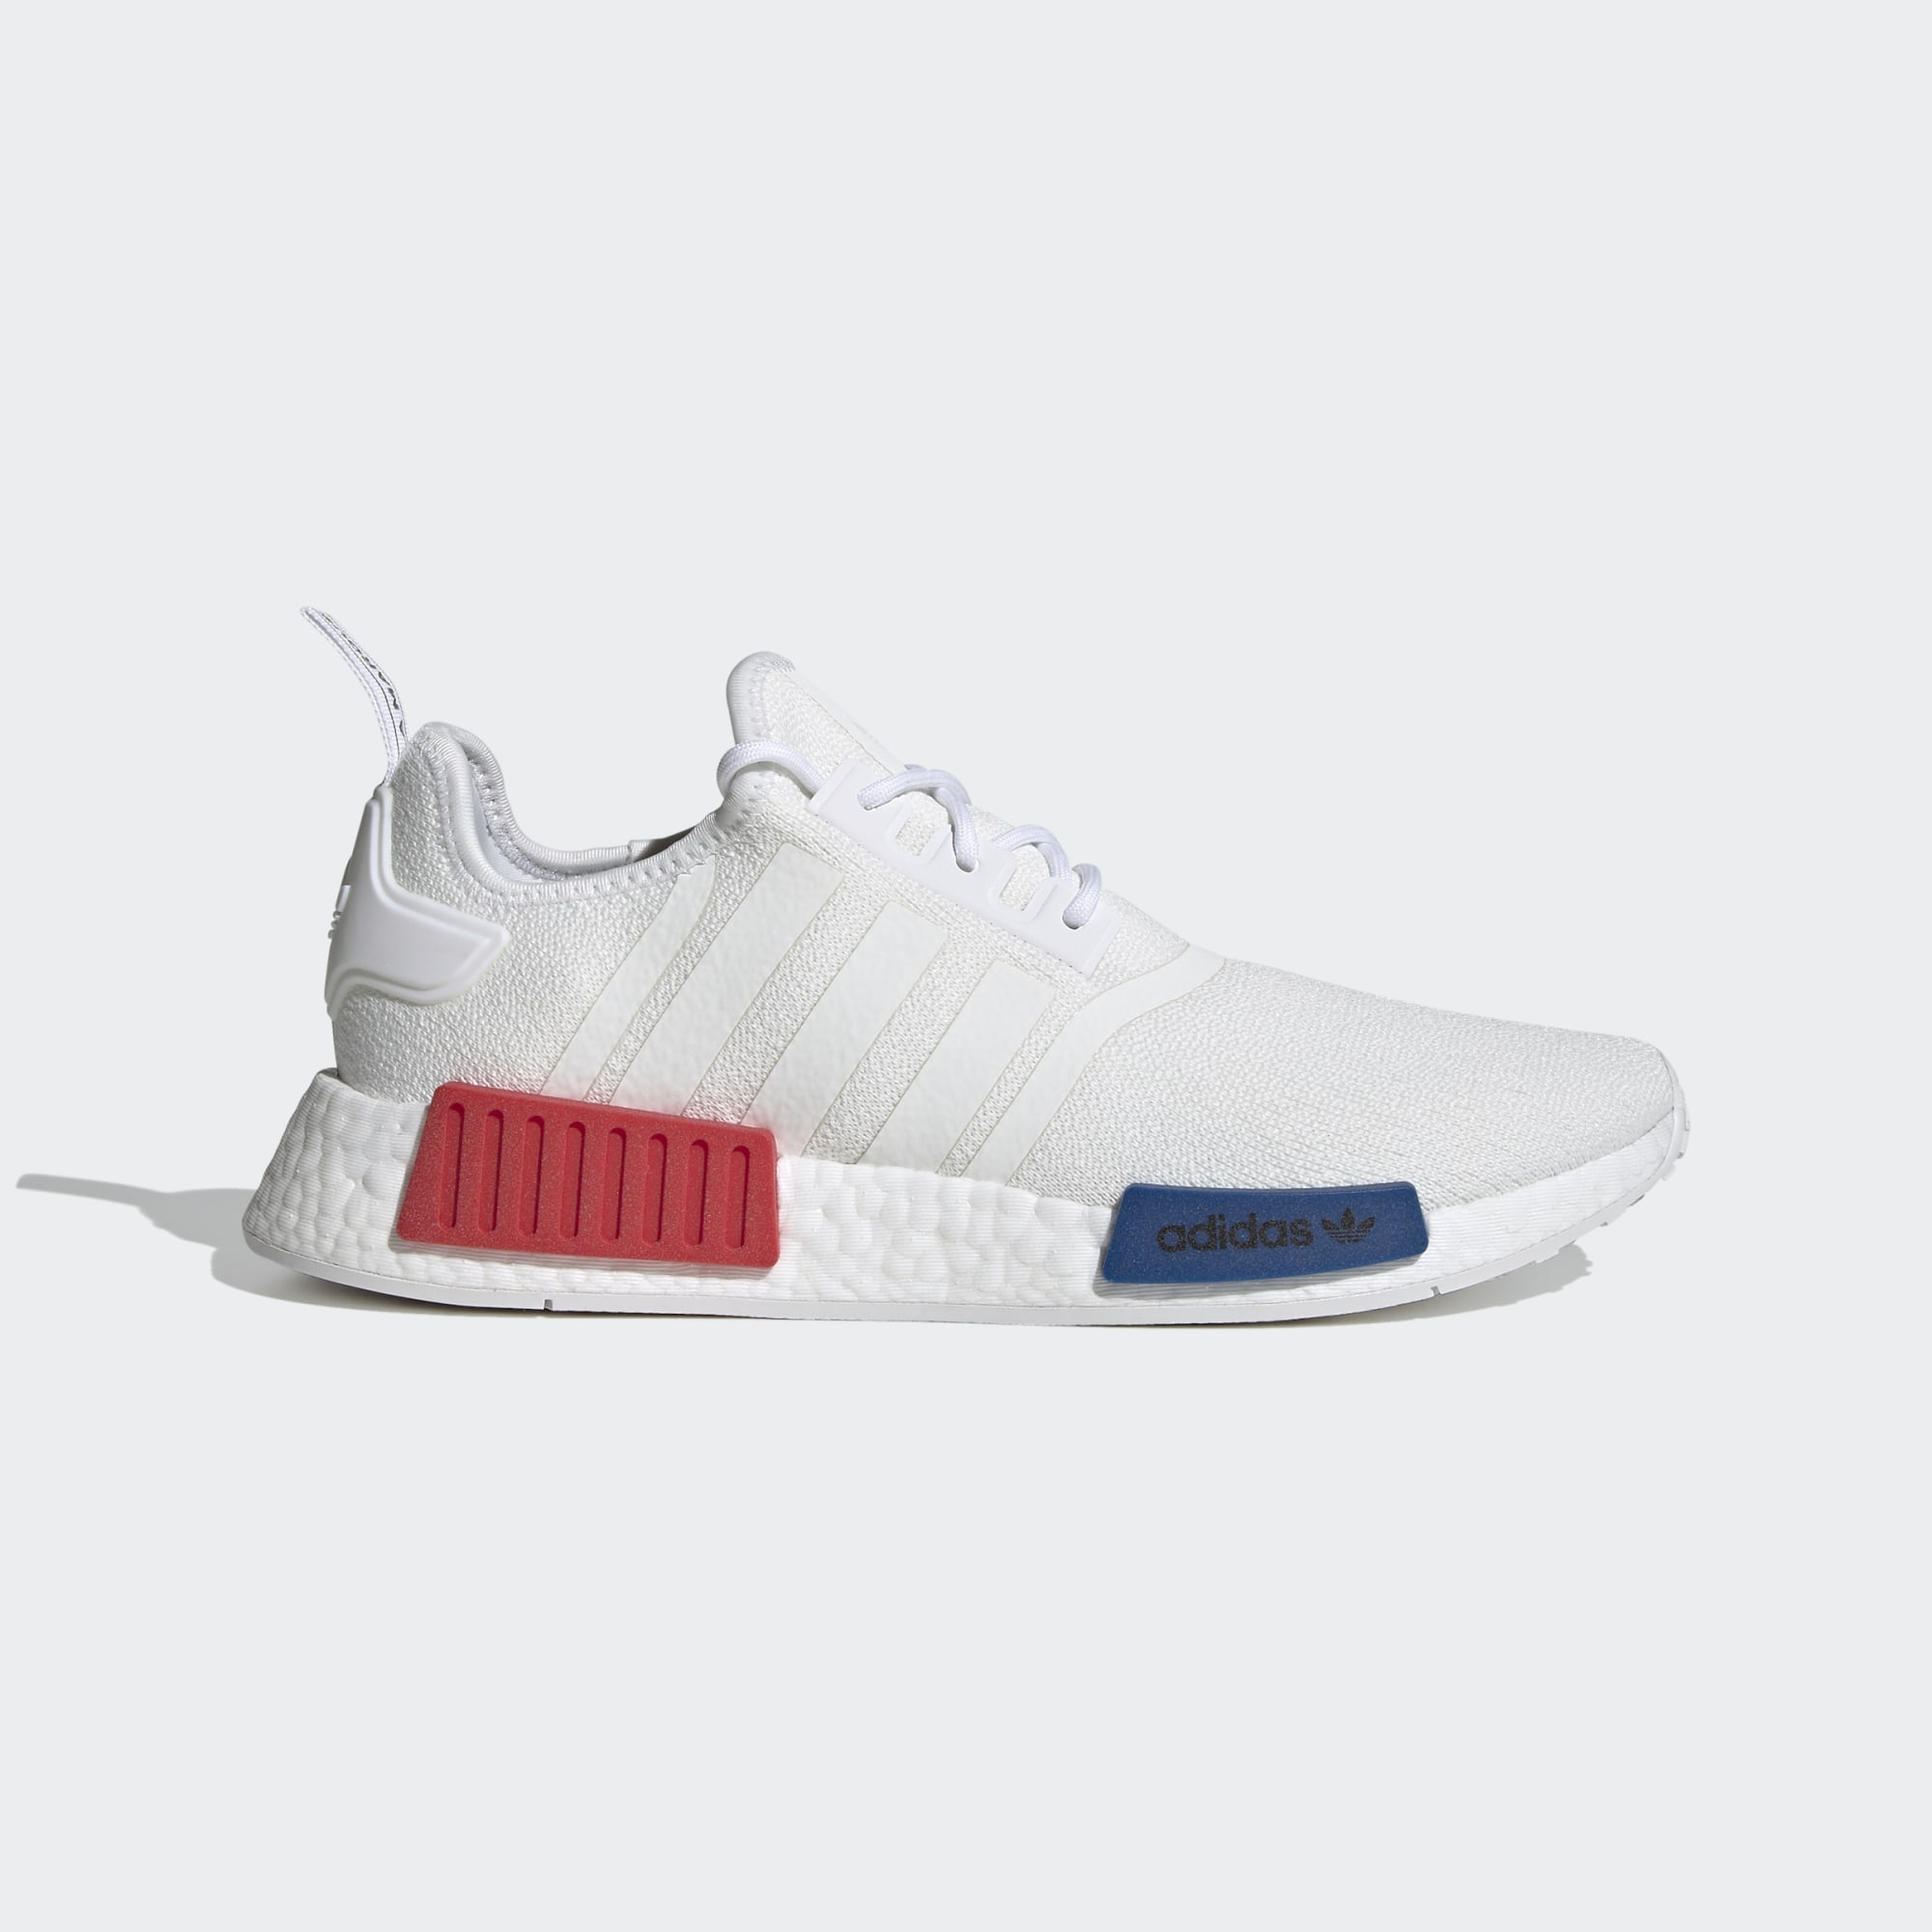 skør sandaler Indvandring adidas alerts on Twitter: "The NMD_R1 returns in its original colorway on  the standard NMD model alongside Grey and White versions, releasing June 2,  with early access for Creators Club members this